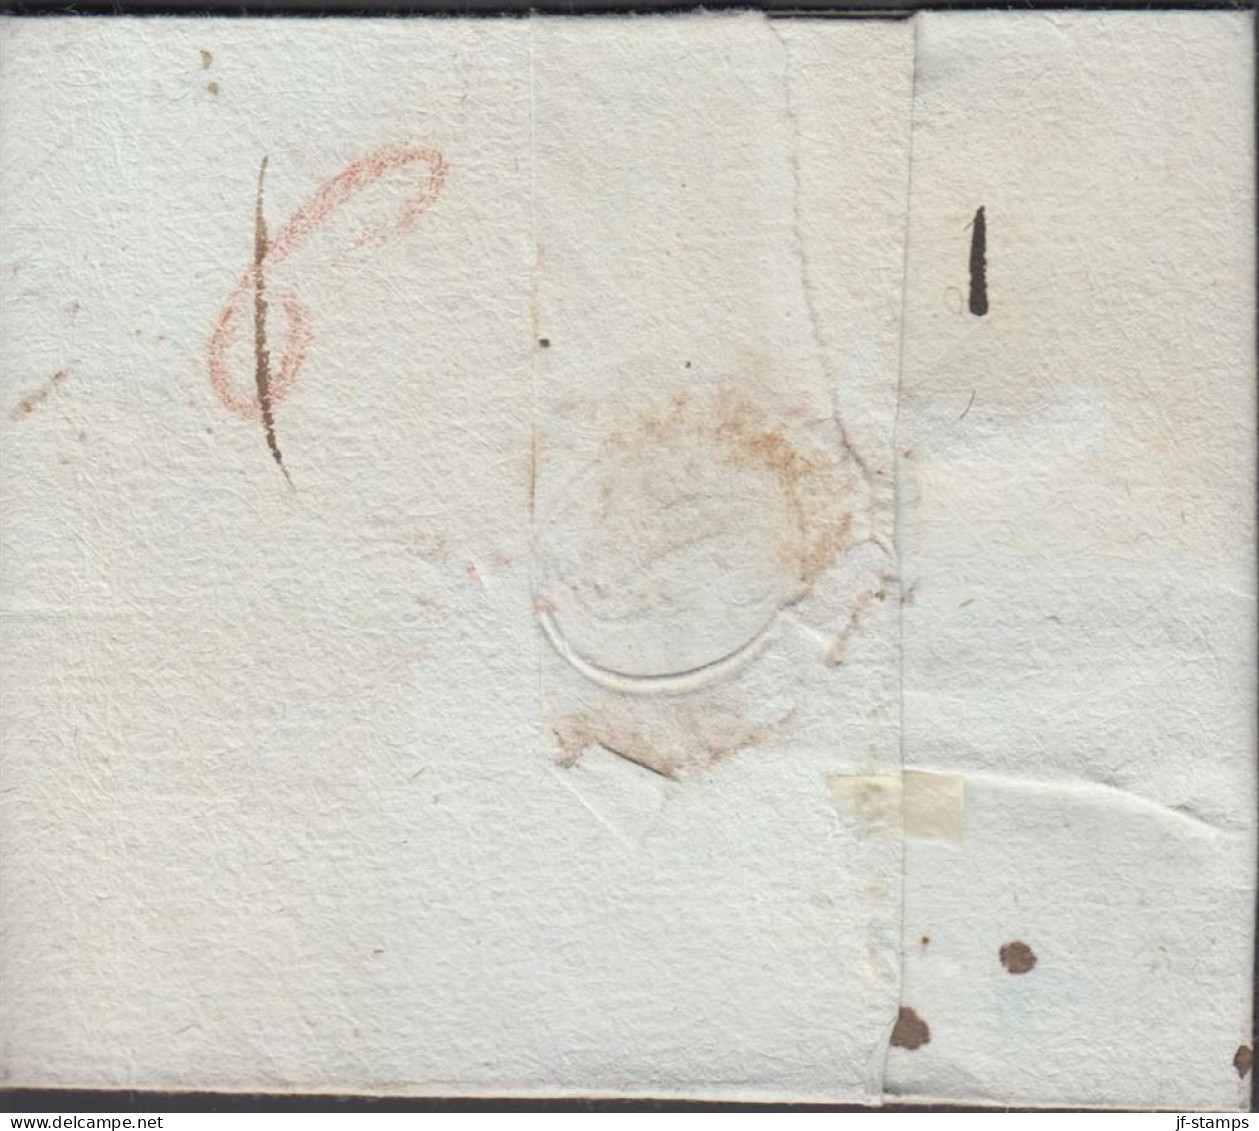 1821. DEUTSCHLAND. Fine Small Old Cover Cancelled WORMS 23 JUL 1821. Postage Marking In Brownred. More Tha... - JF436634 - Prephilately